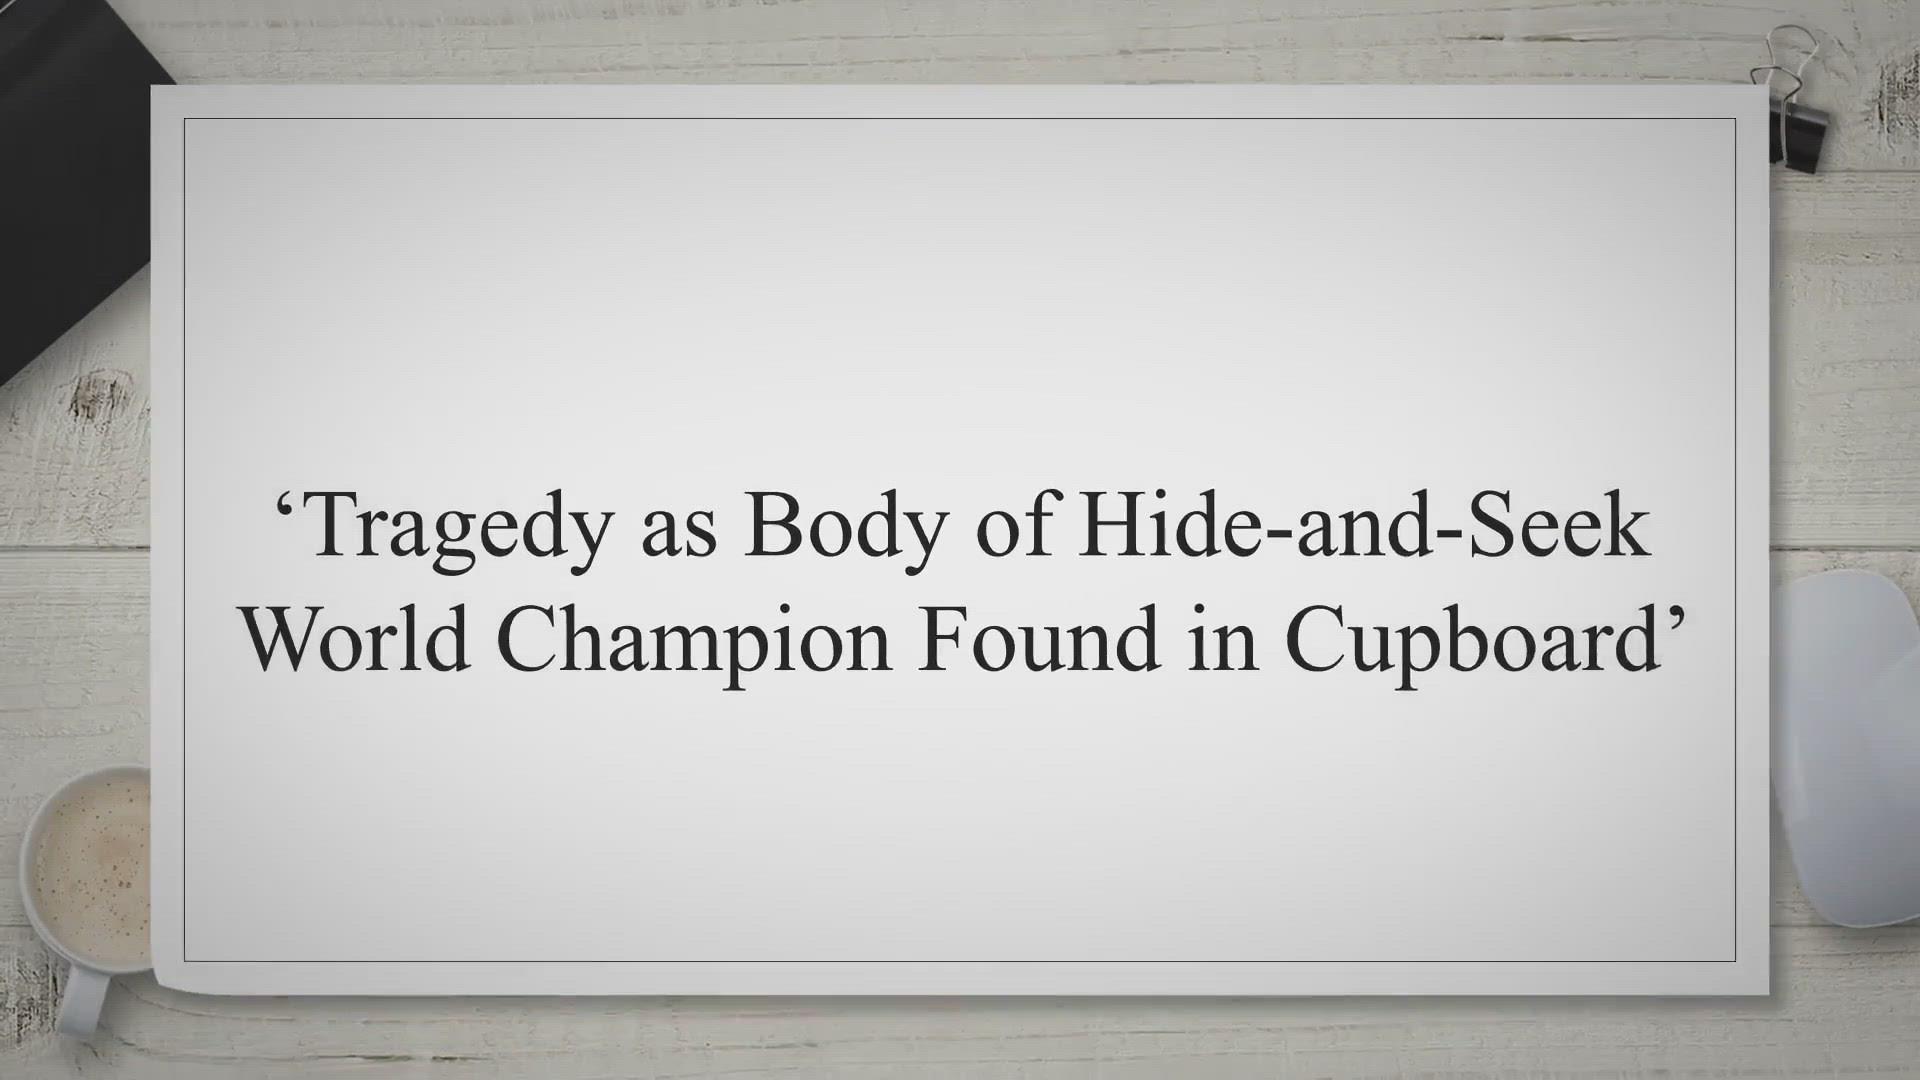 'Video thumbnail for ‘Tragedy as Body of Hide-and-Seek World Champion Found in Cupboard’'